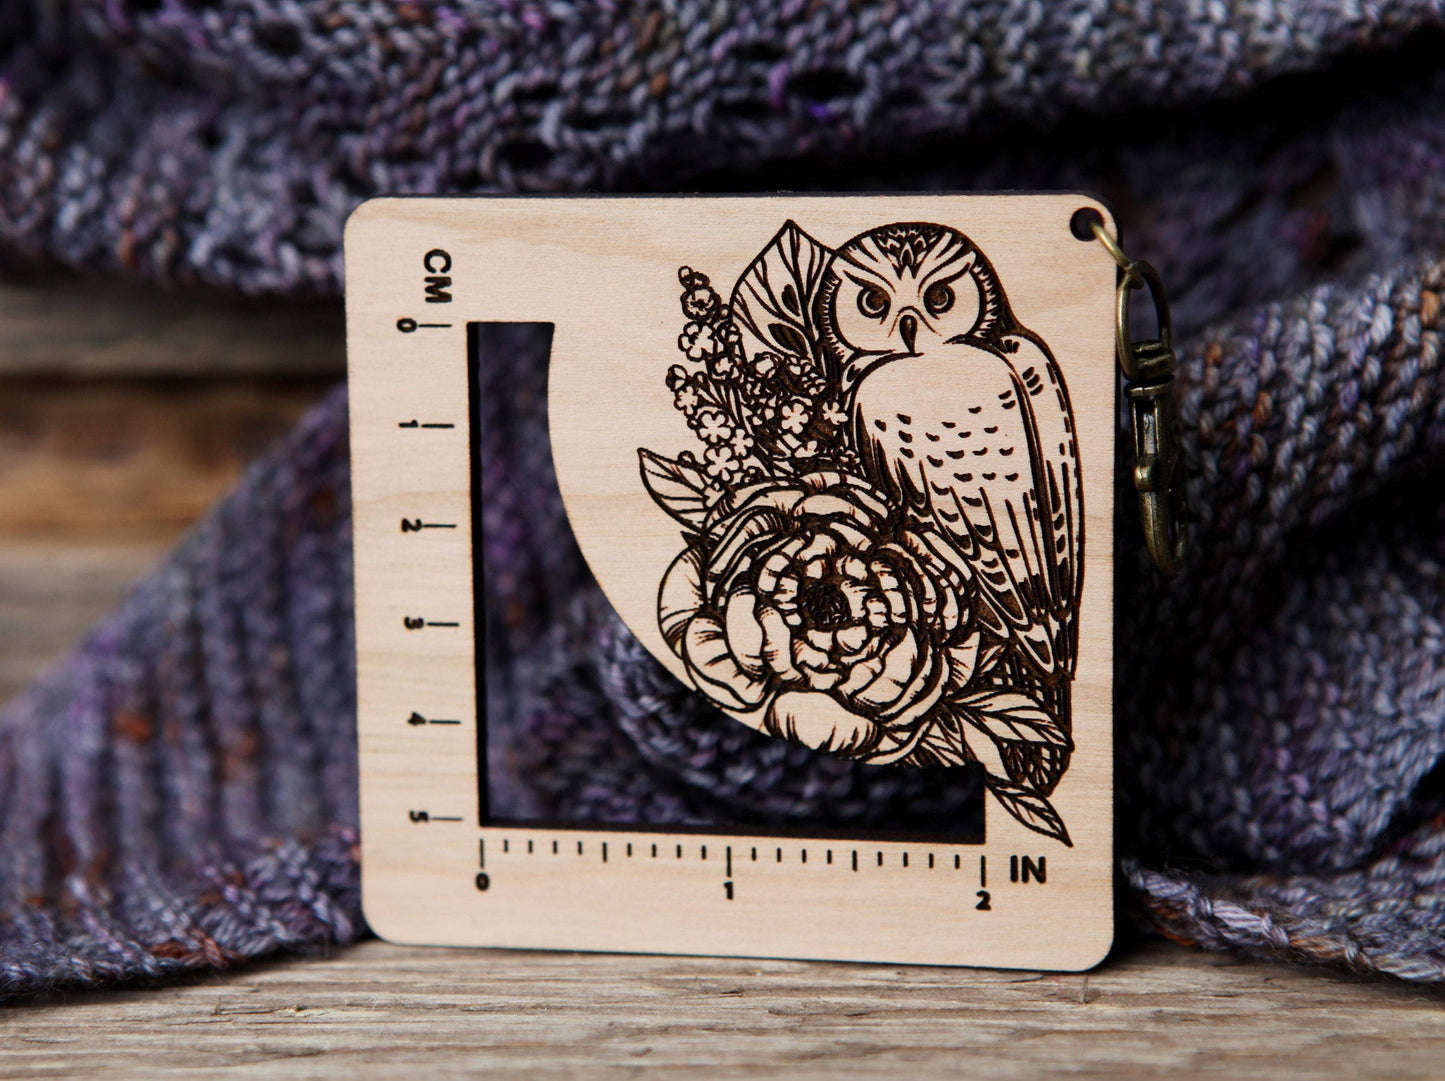 Sunrise Grove Owl & Plants Knit/Crochet Gauge Ruler, Cherry & Bronze Clasp Notions and Tools